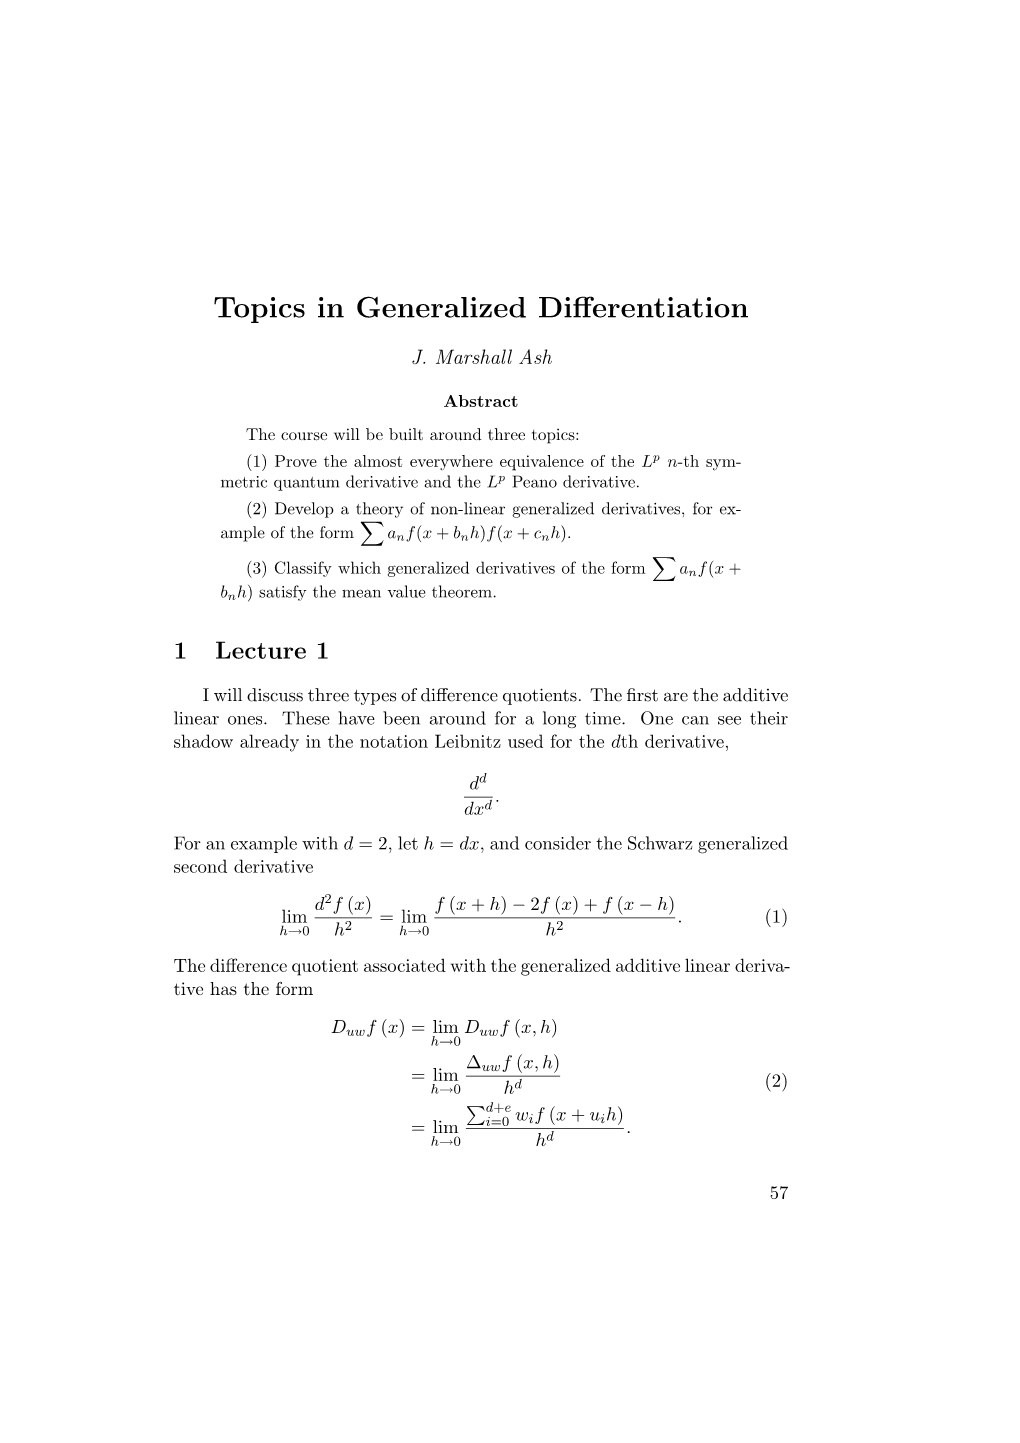 Topics in Generalized Differentiation